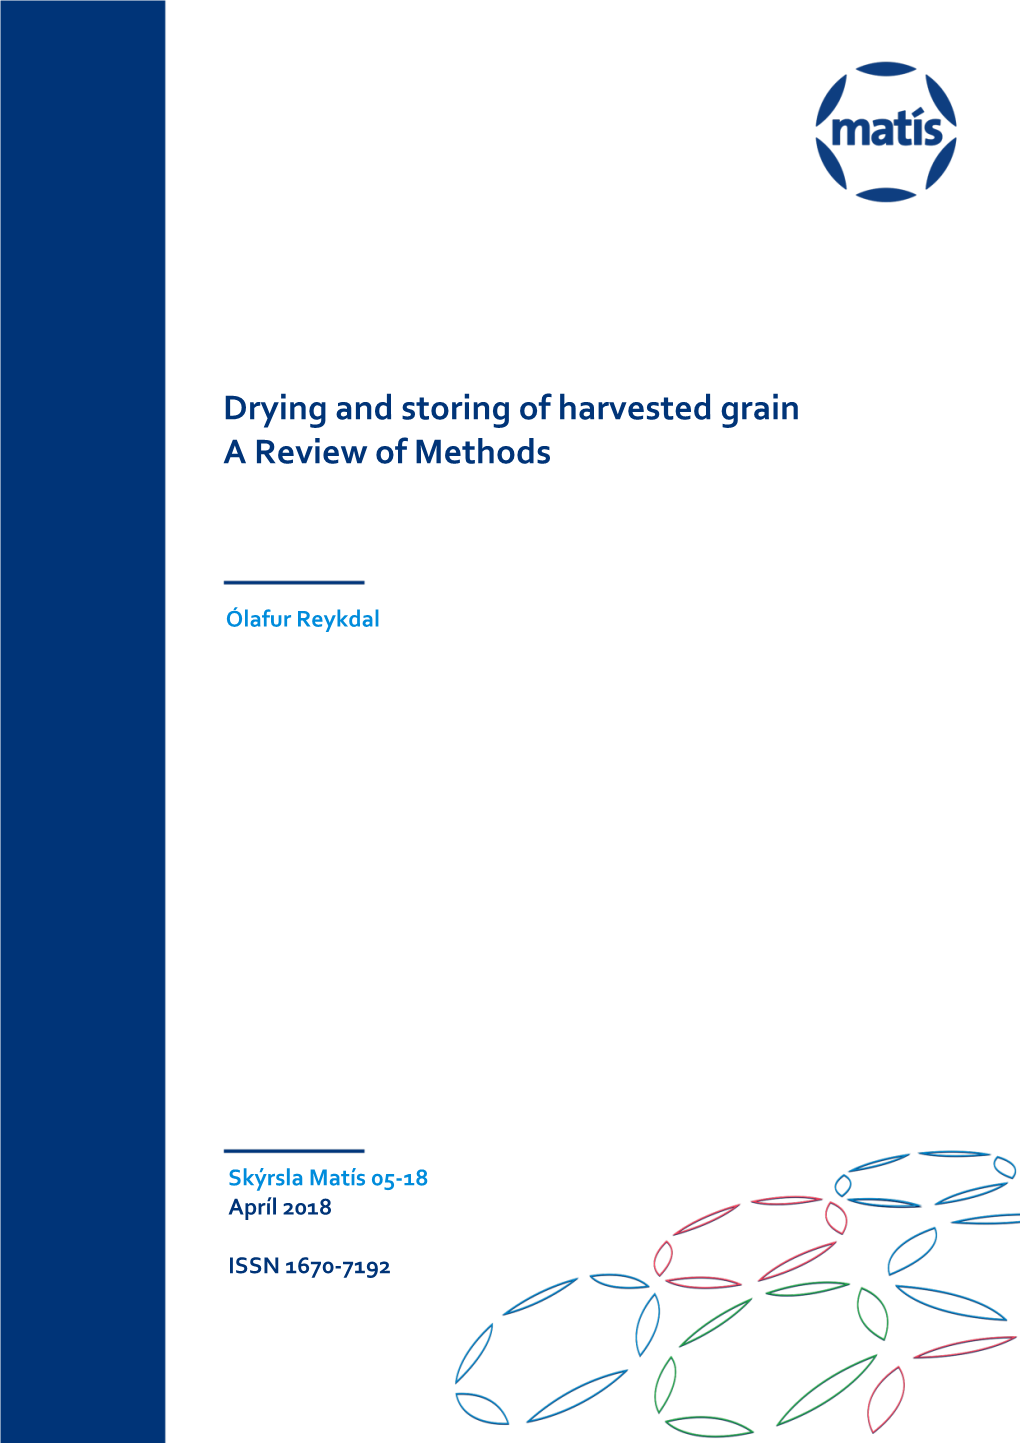 Drying and Storing of Harvested Grain a Review of Methods